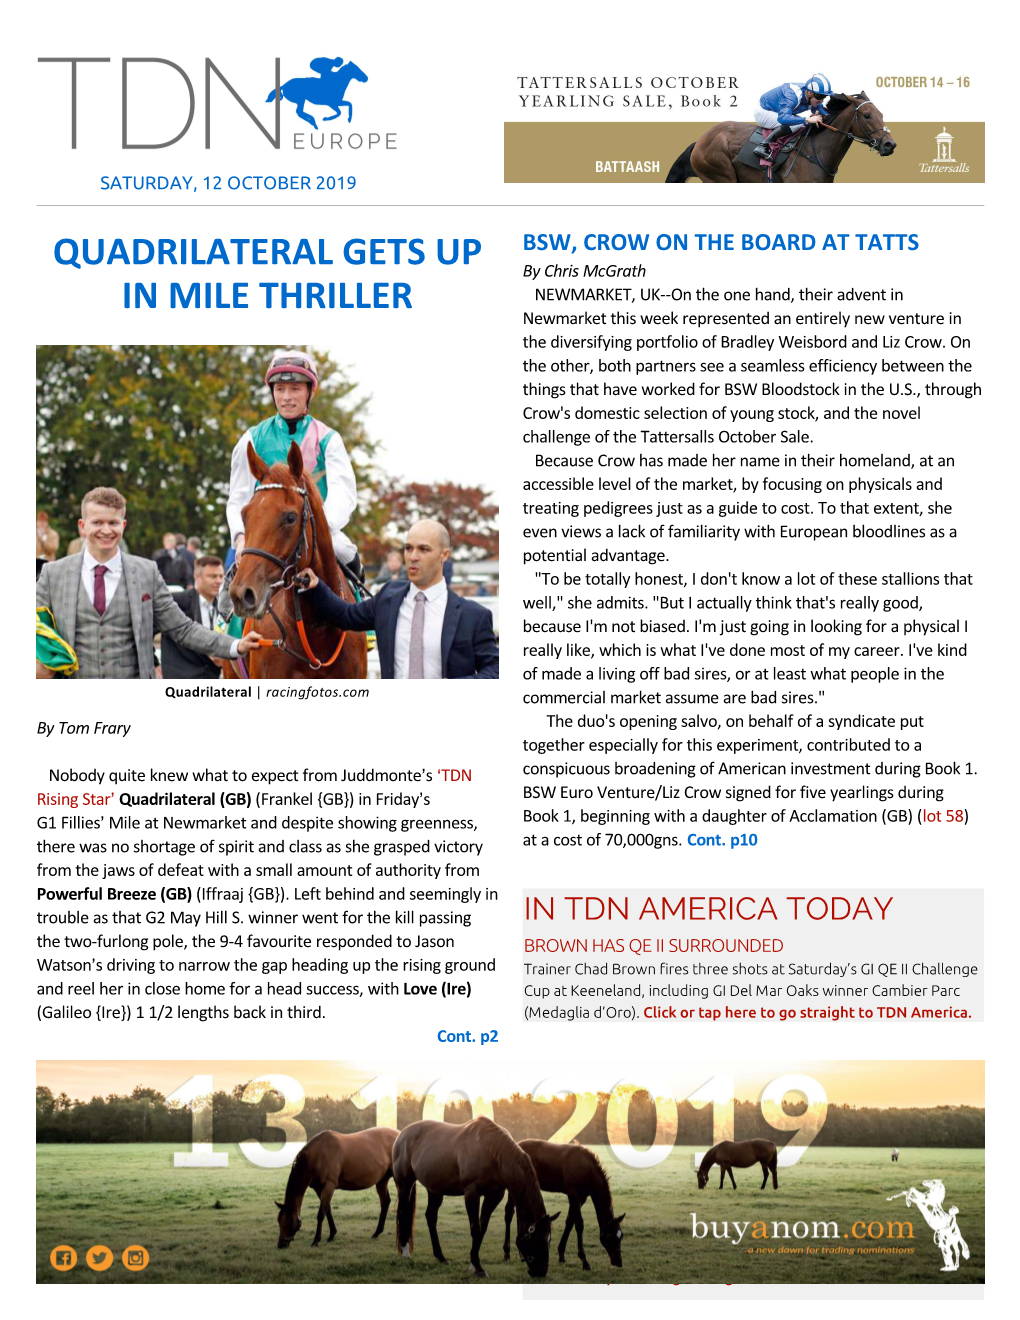 Quadrilateral Gets up in Mile Thriller Cont